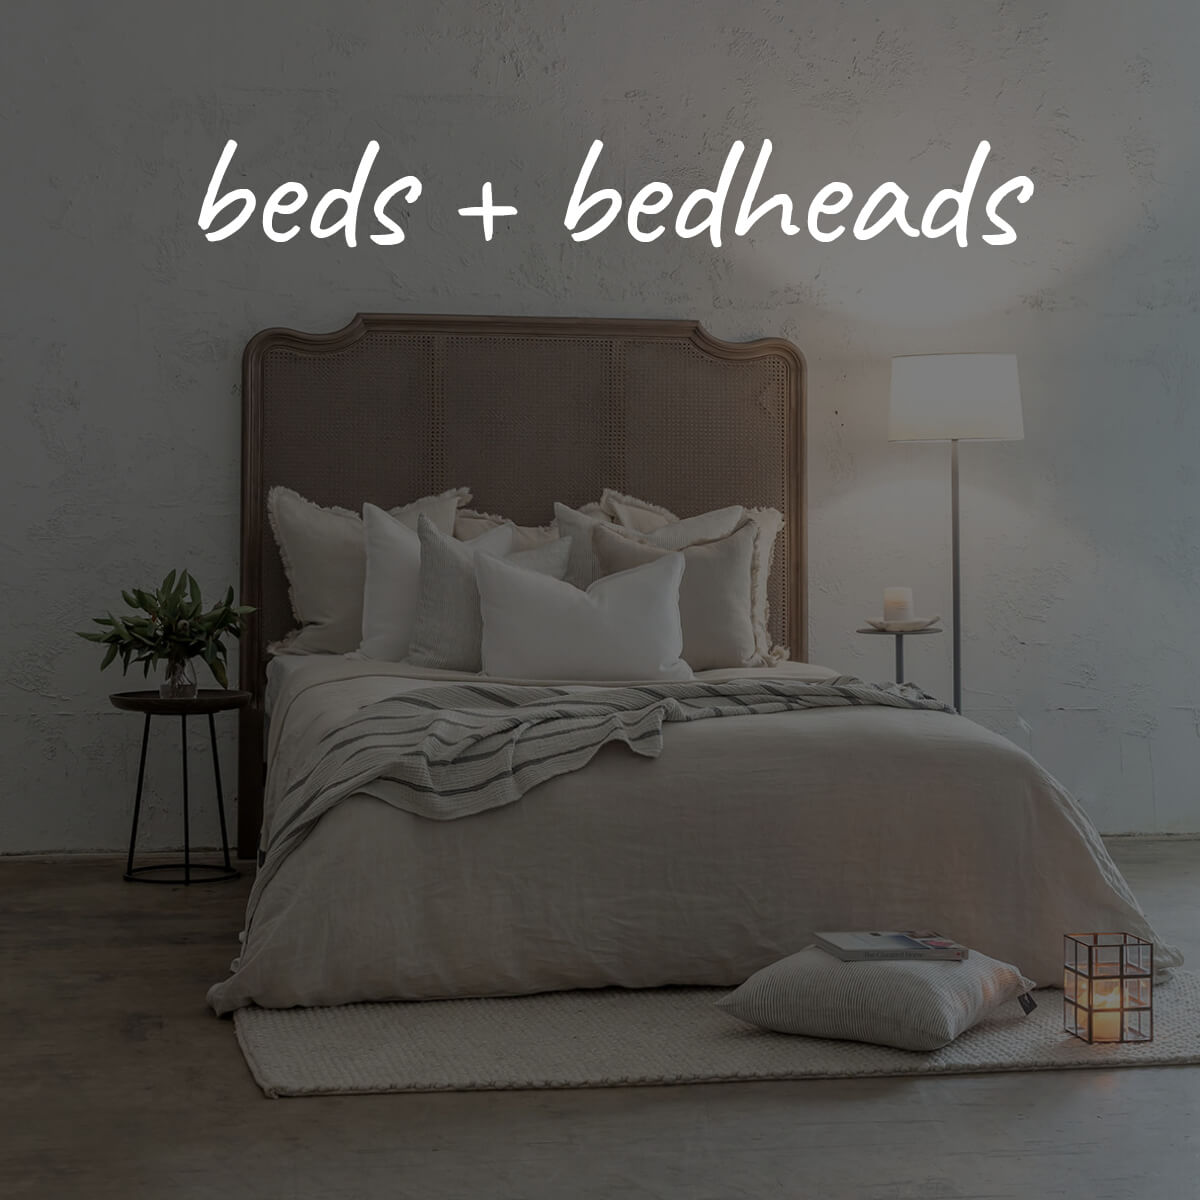 BEDS + BEDHEADS